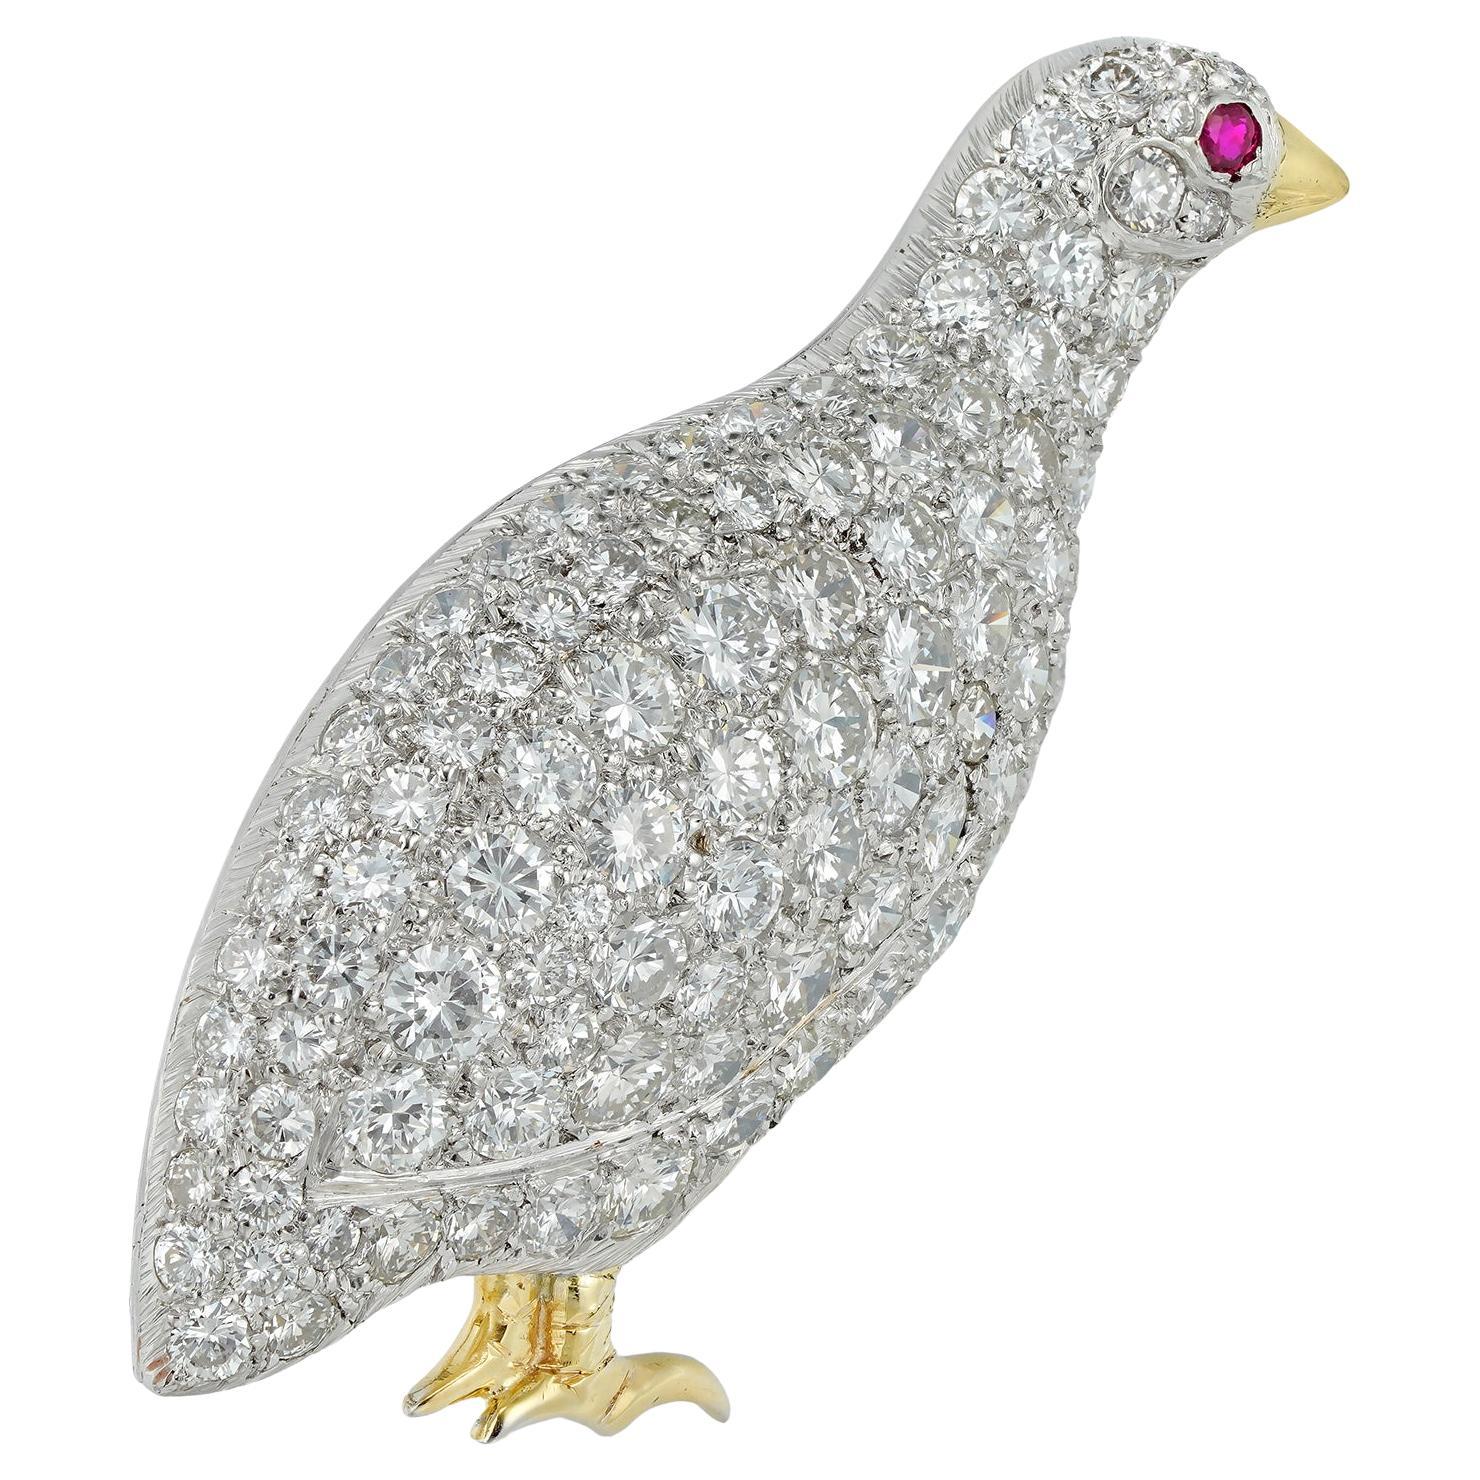 A diamond-set partridge brooch, the body pave-set with round brilliant-cut diamonds estimated to weigh approximately 5 carats in total and a round faceted ruby-set eye, the beak and feet gold gilded, with a gold brooch fitting, hallmarked 950